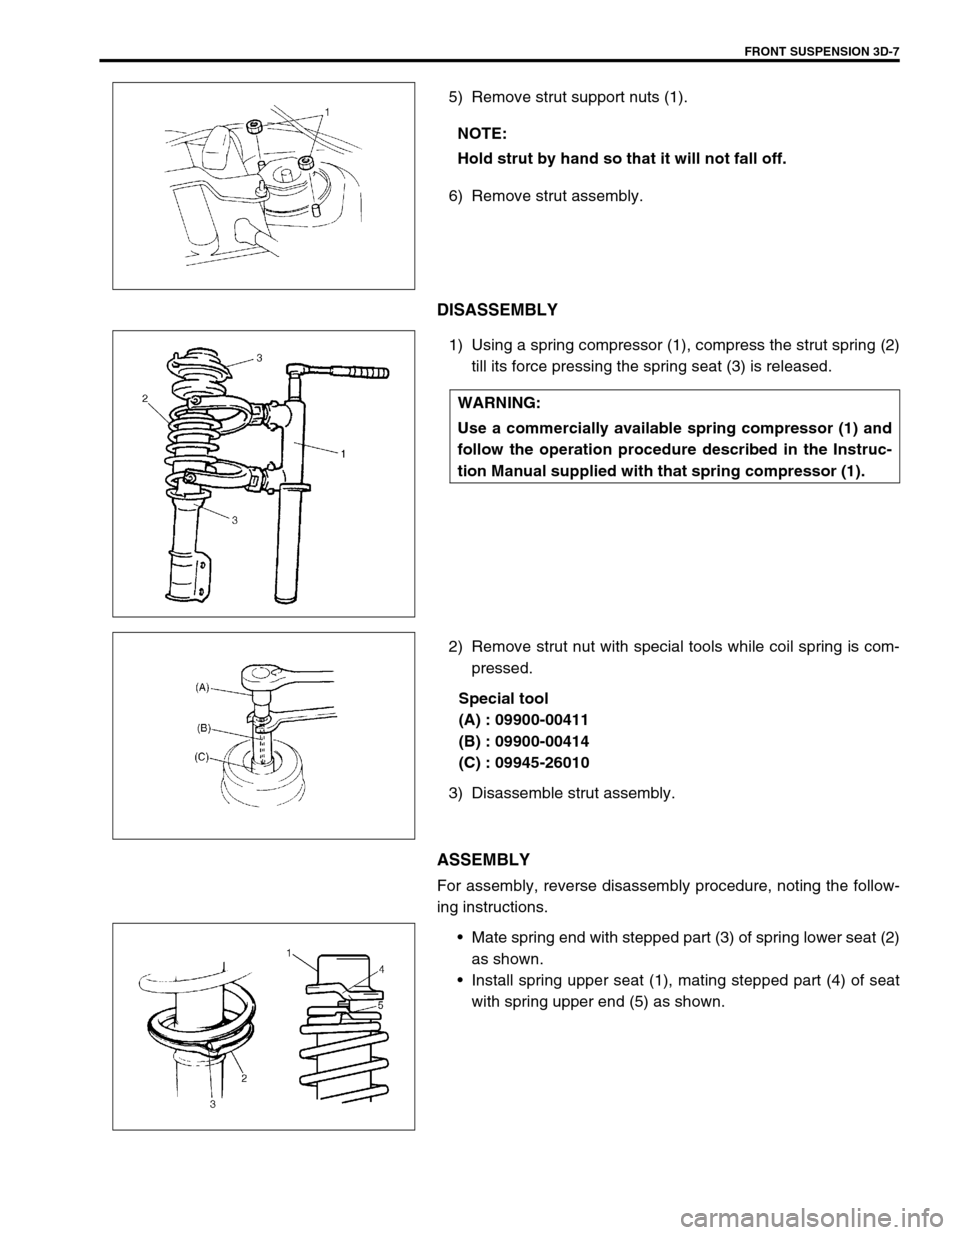 SUZUKI SWIFT 2000 1.G RG413 Service Workshop Manual FRONT SUSPENSION 3D-7
5) Remove strut support nuts (1).
6) Remove strut assembly.
DISASSEMBLY
1) Using a spring compressor (1), compress the strut spring (2)
till its force pressing the spring seat (3